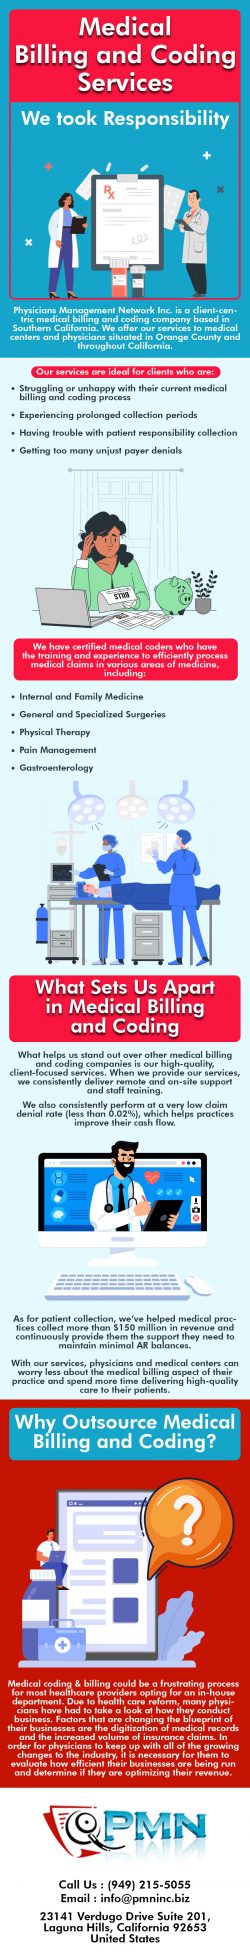 Simplify Your Medical Coding & Billing Processes with PMN Inc.